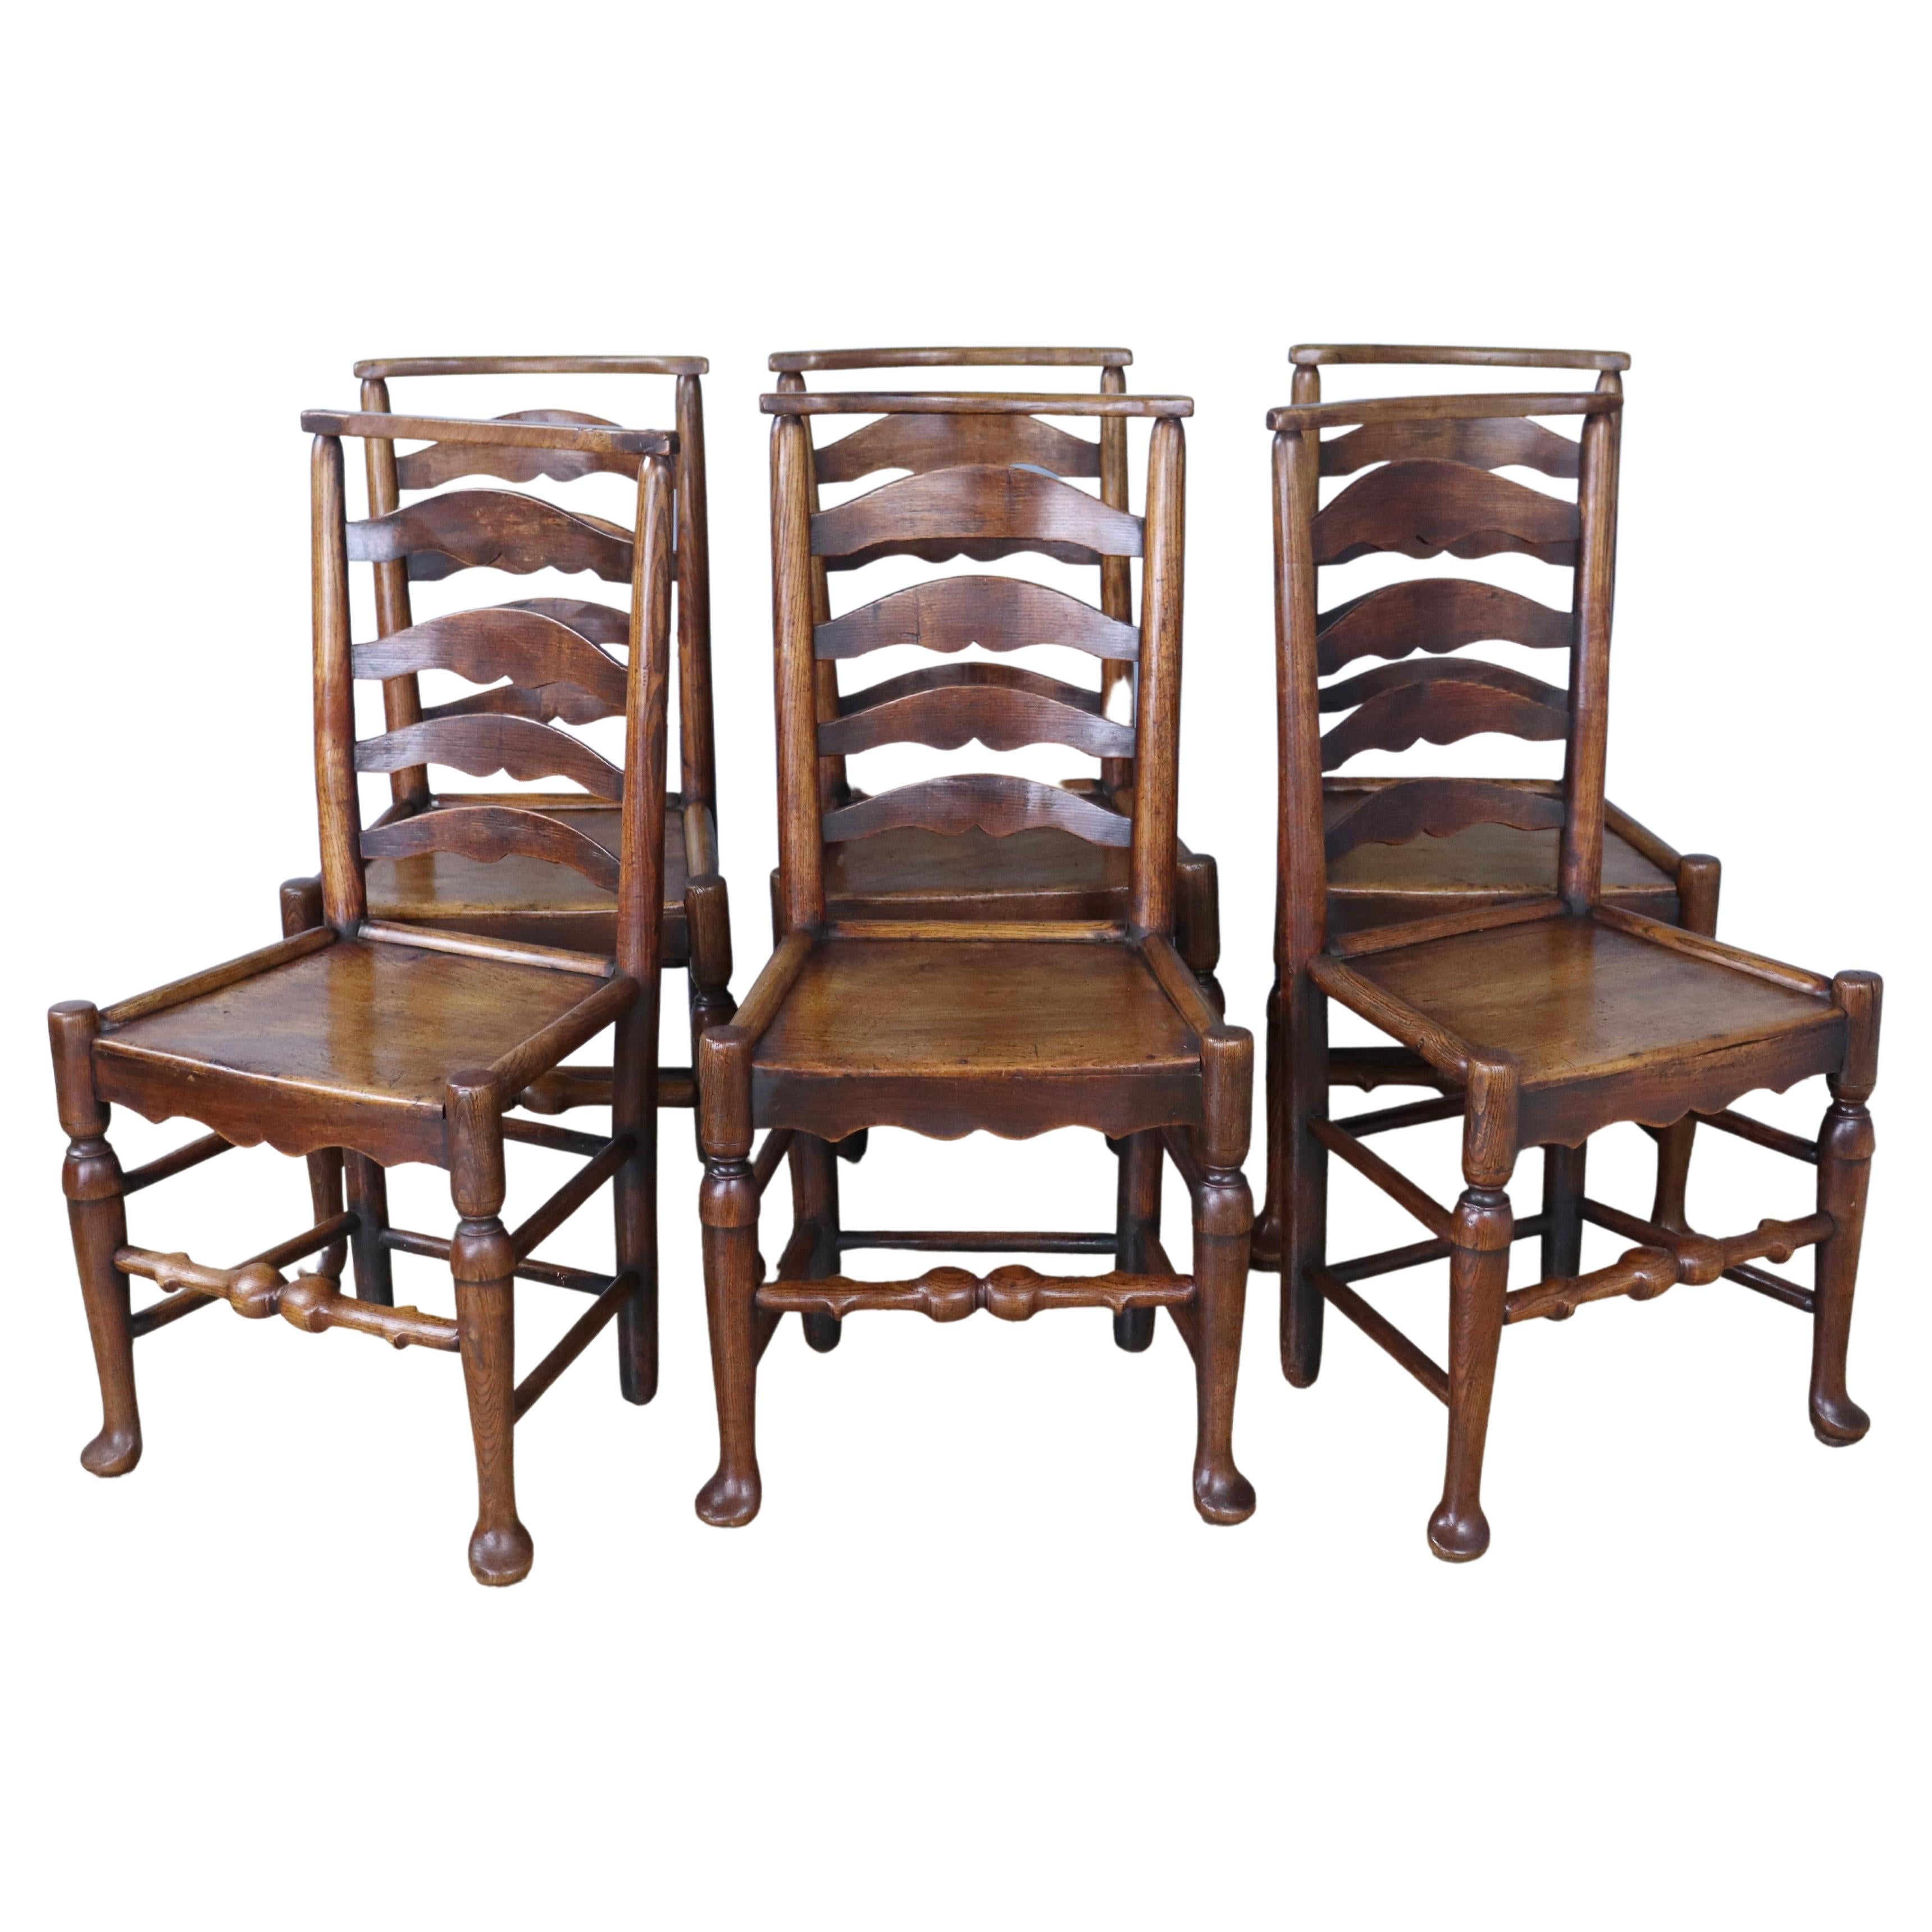 Set of 6 Welsh Country Oak Ladderback Chairs For Sale